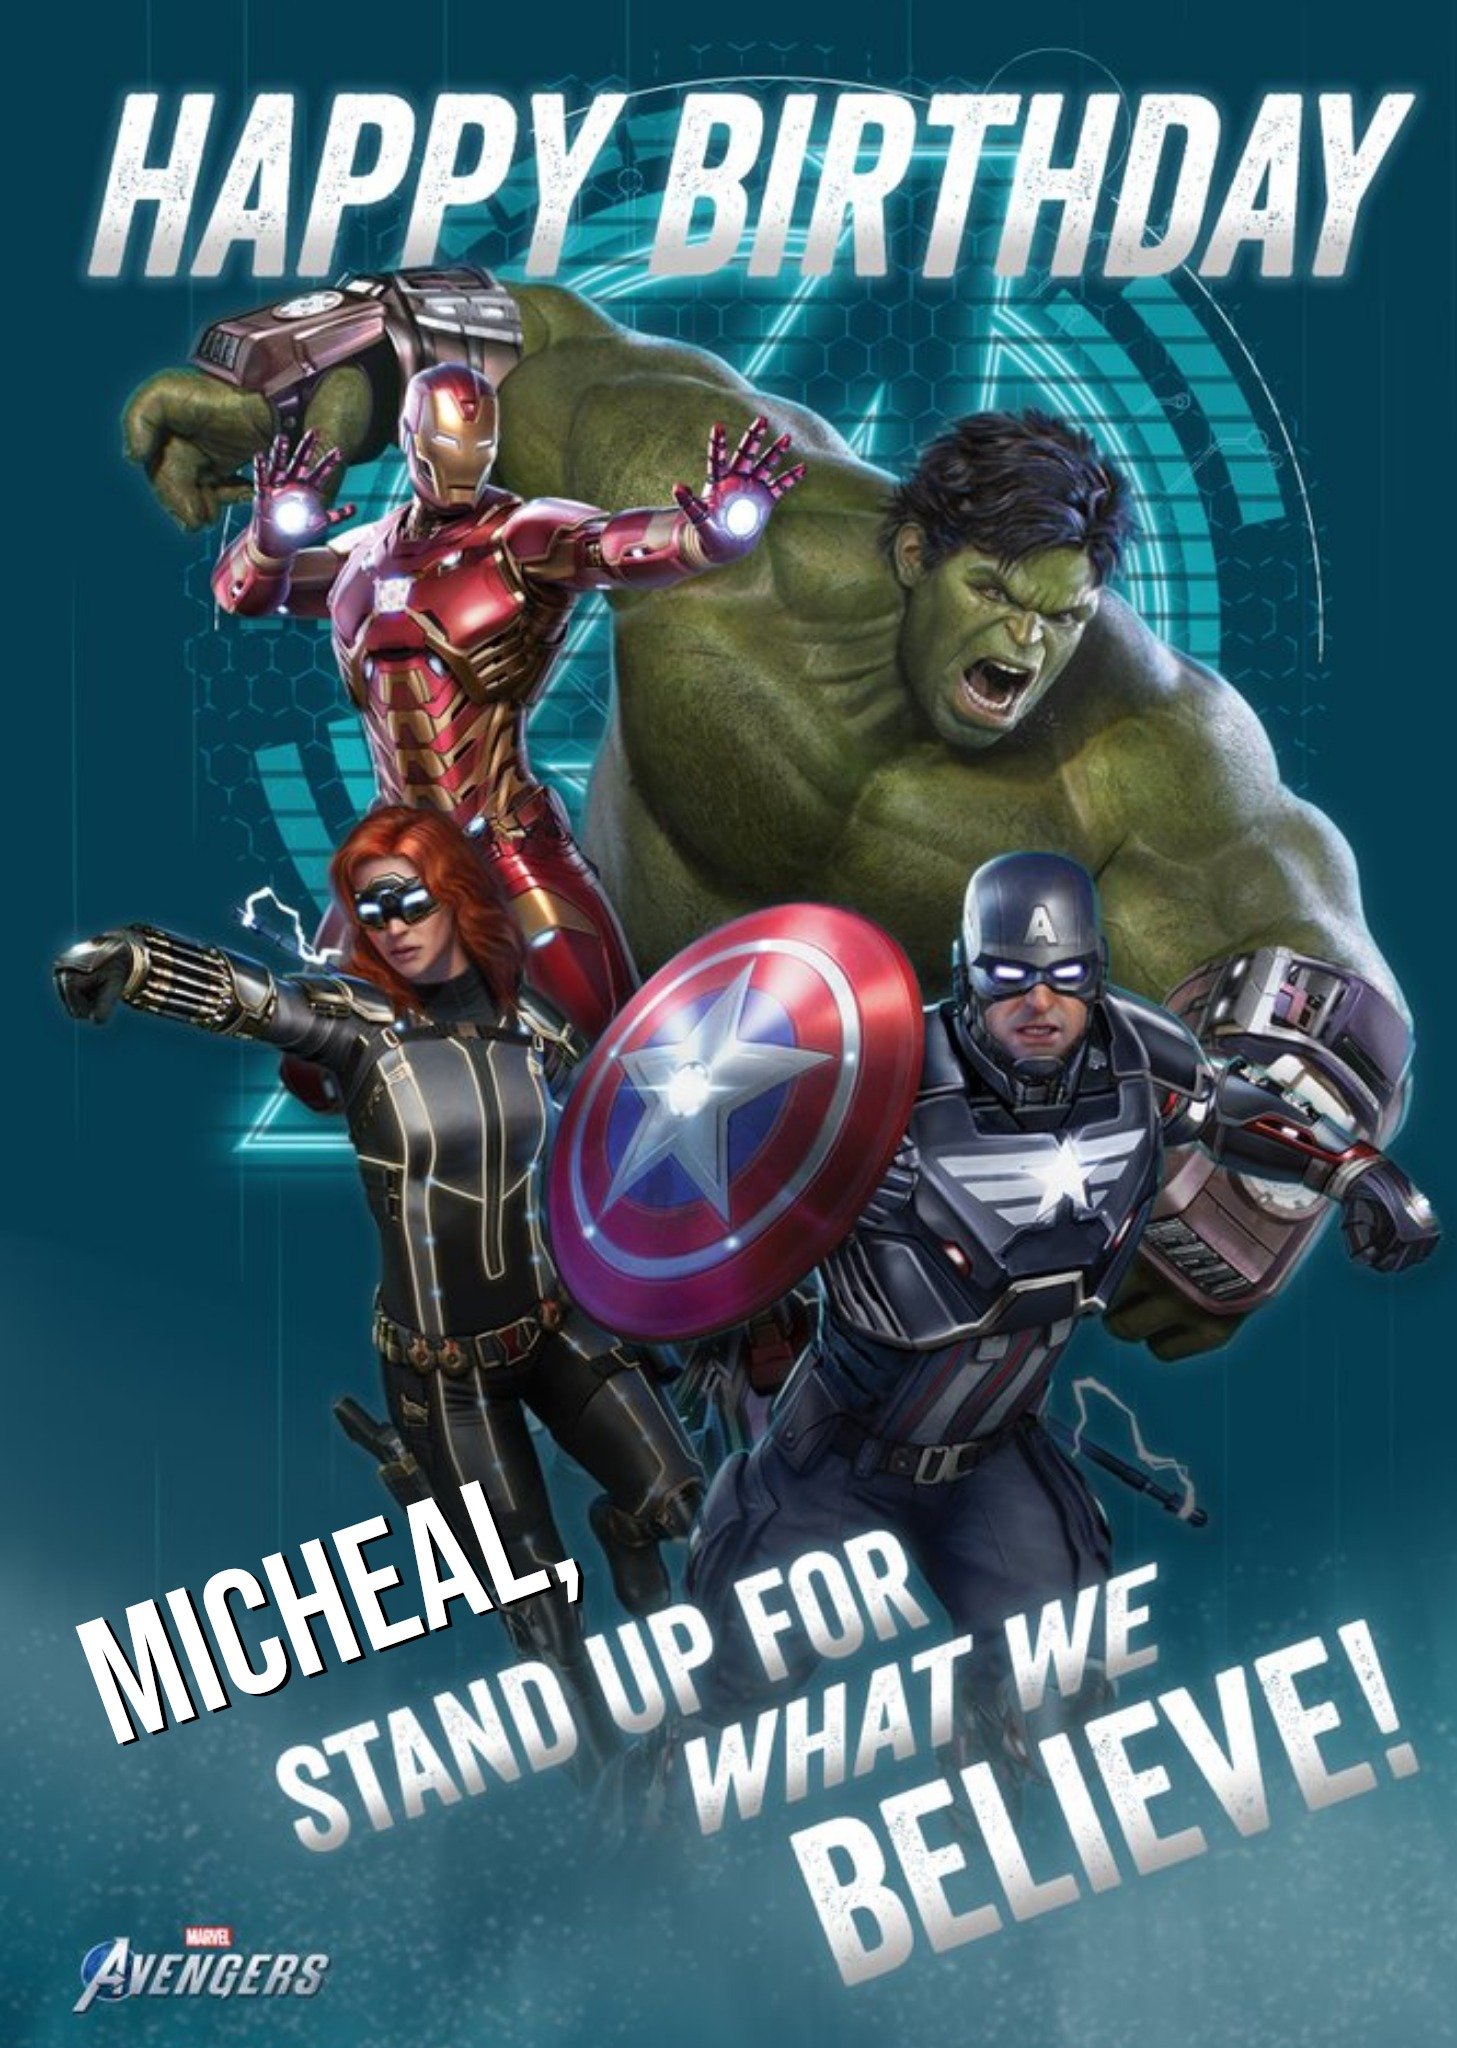 Marvel Avengers Gamerverse Stand Up For What We Believe Birthday Card Ecard